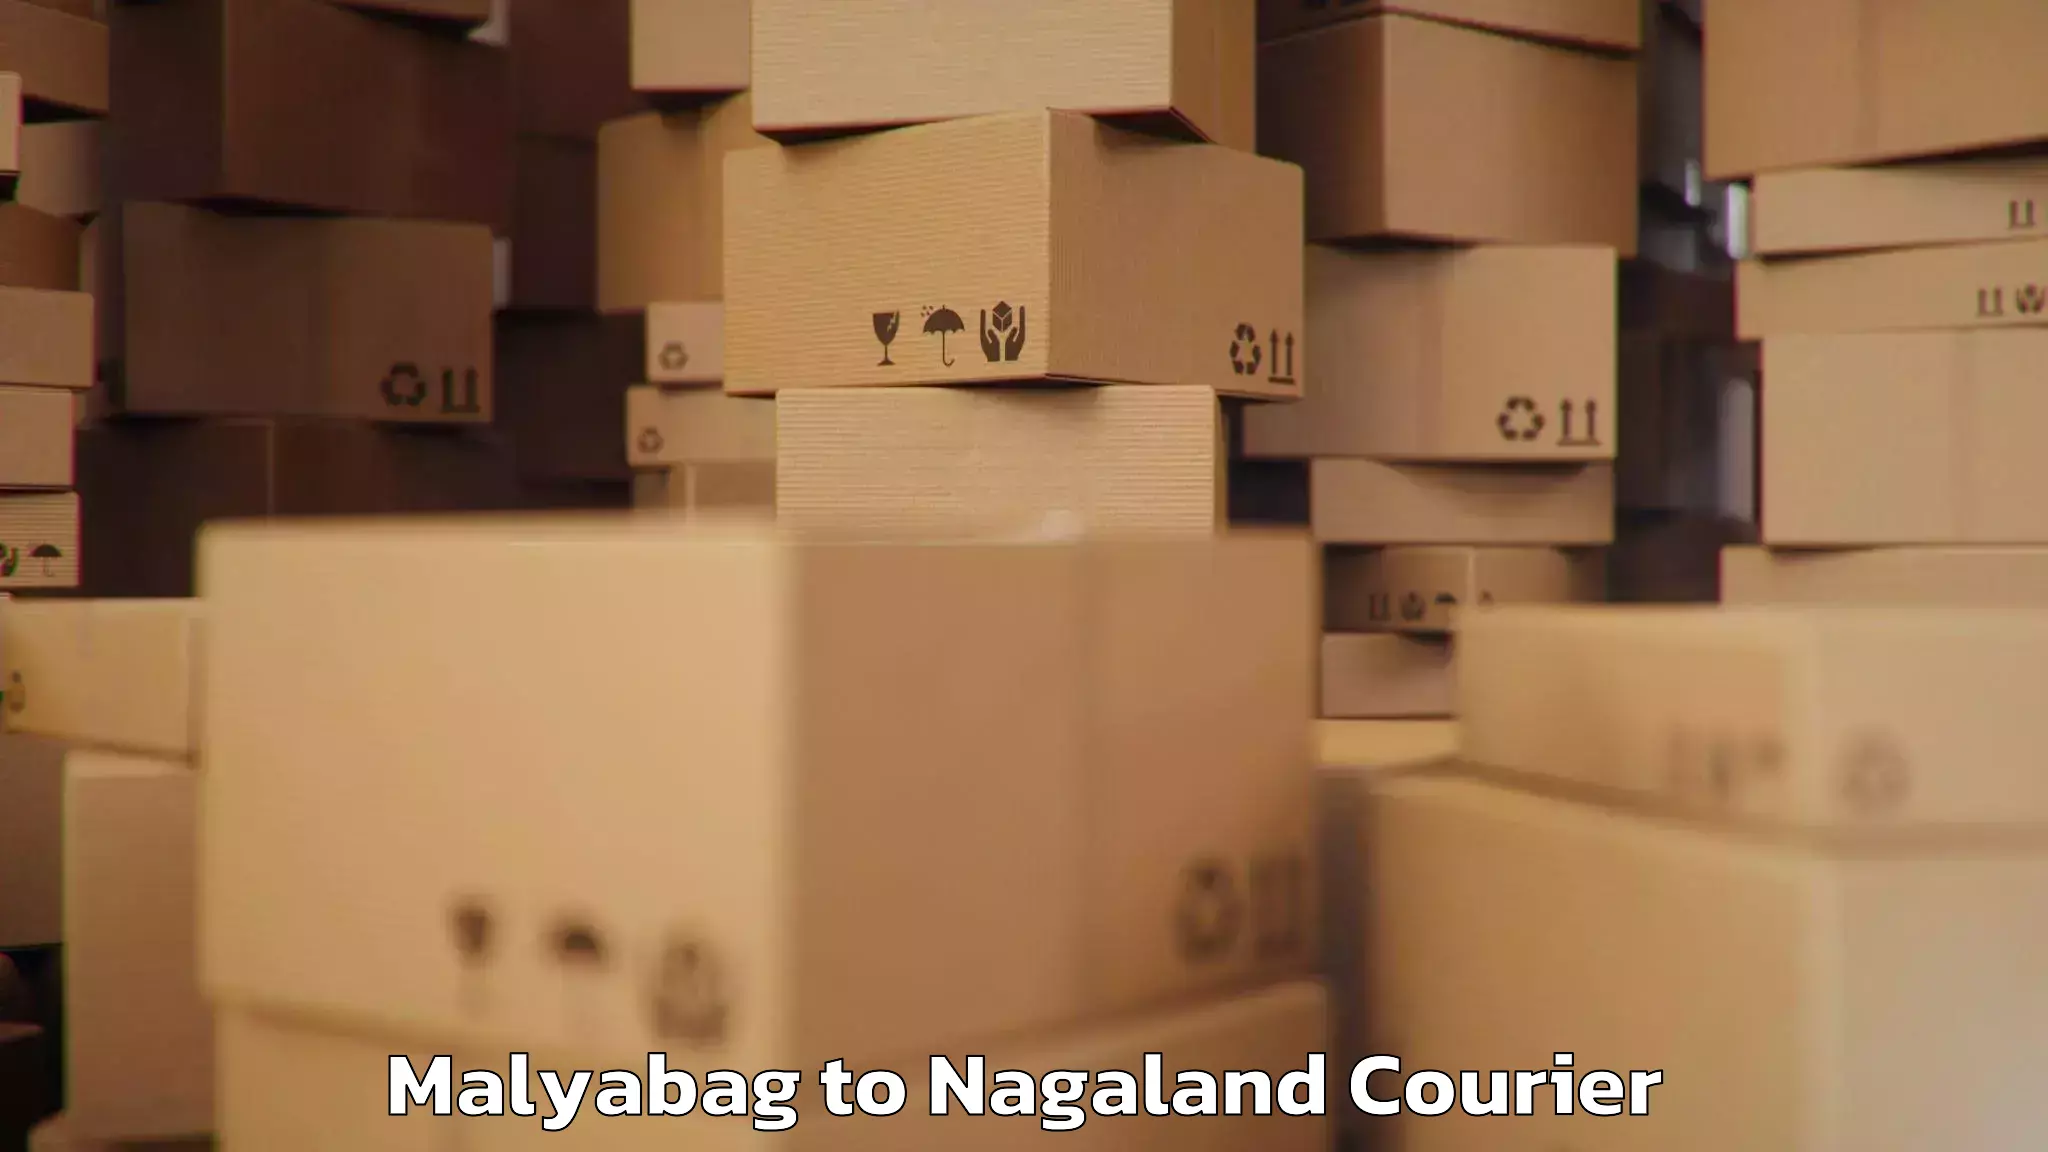 Luggage transport consulting Malyabag to Dimapur